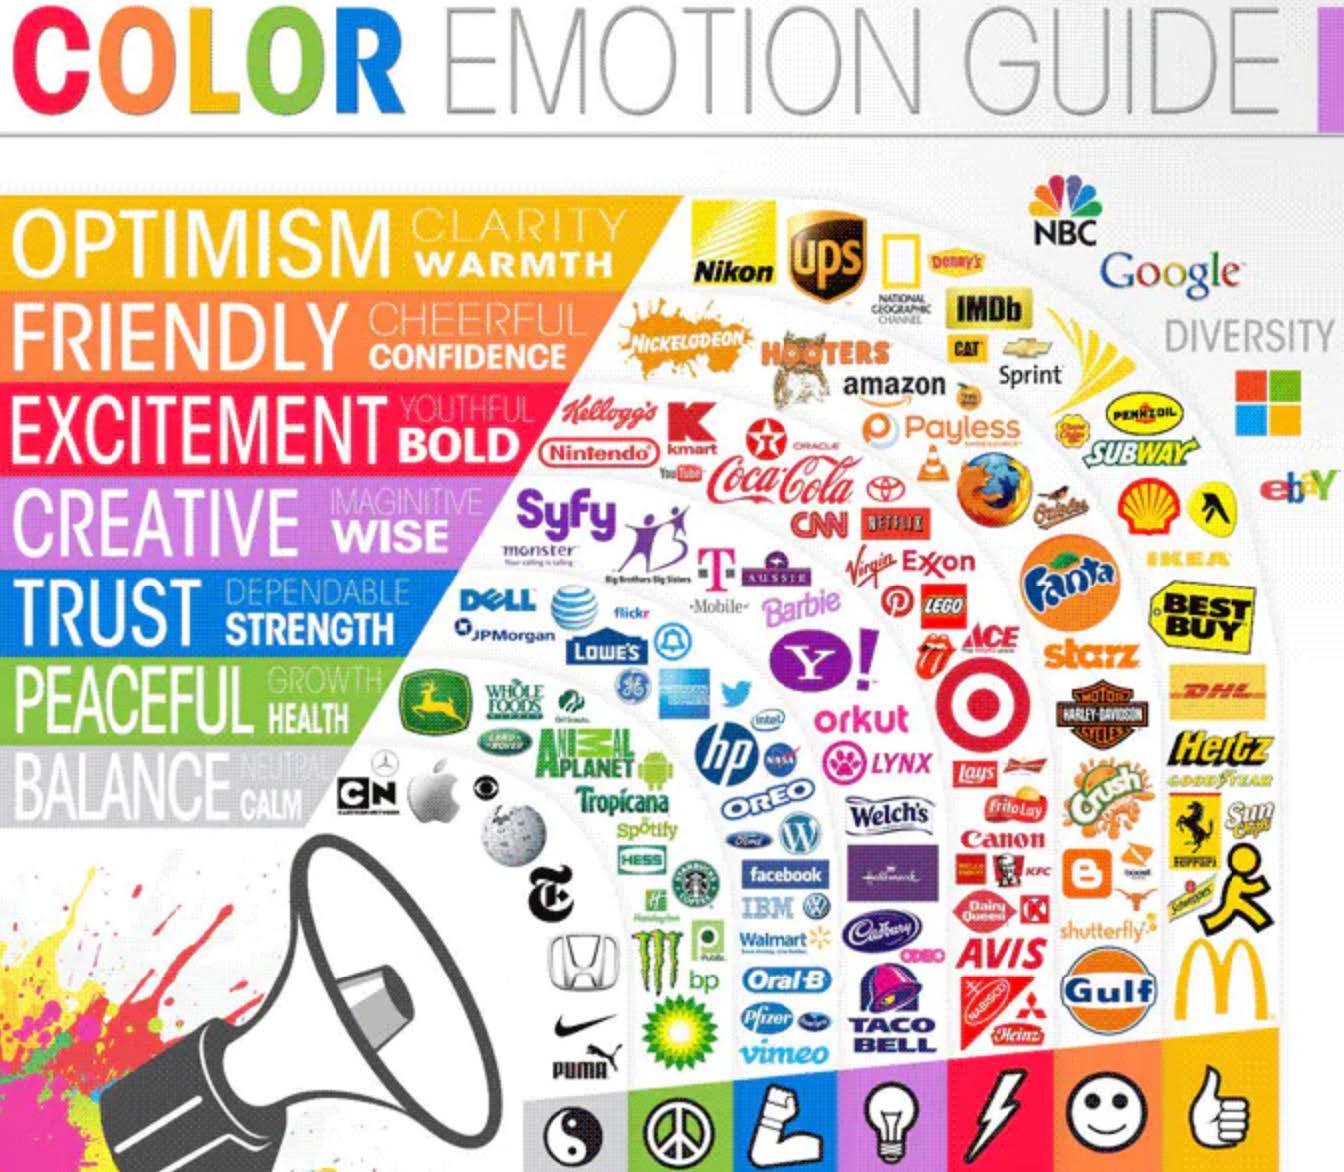 Color Emotion Guide with colors assigned to emotions and various brand logos